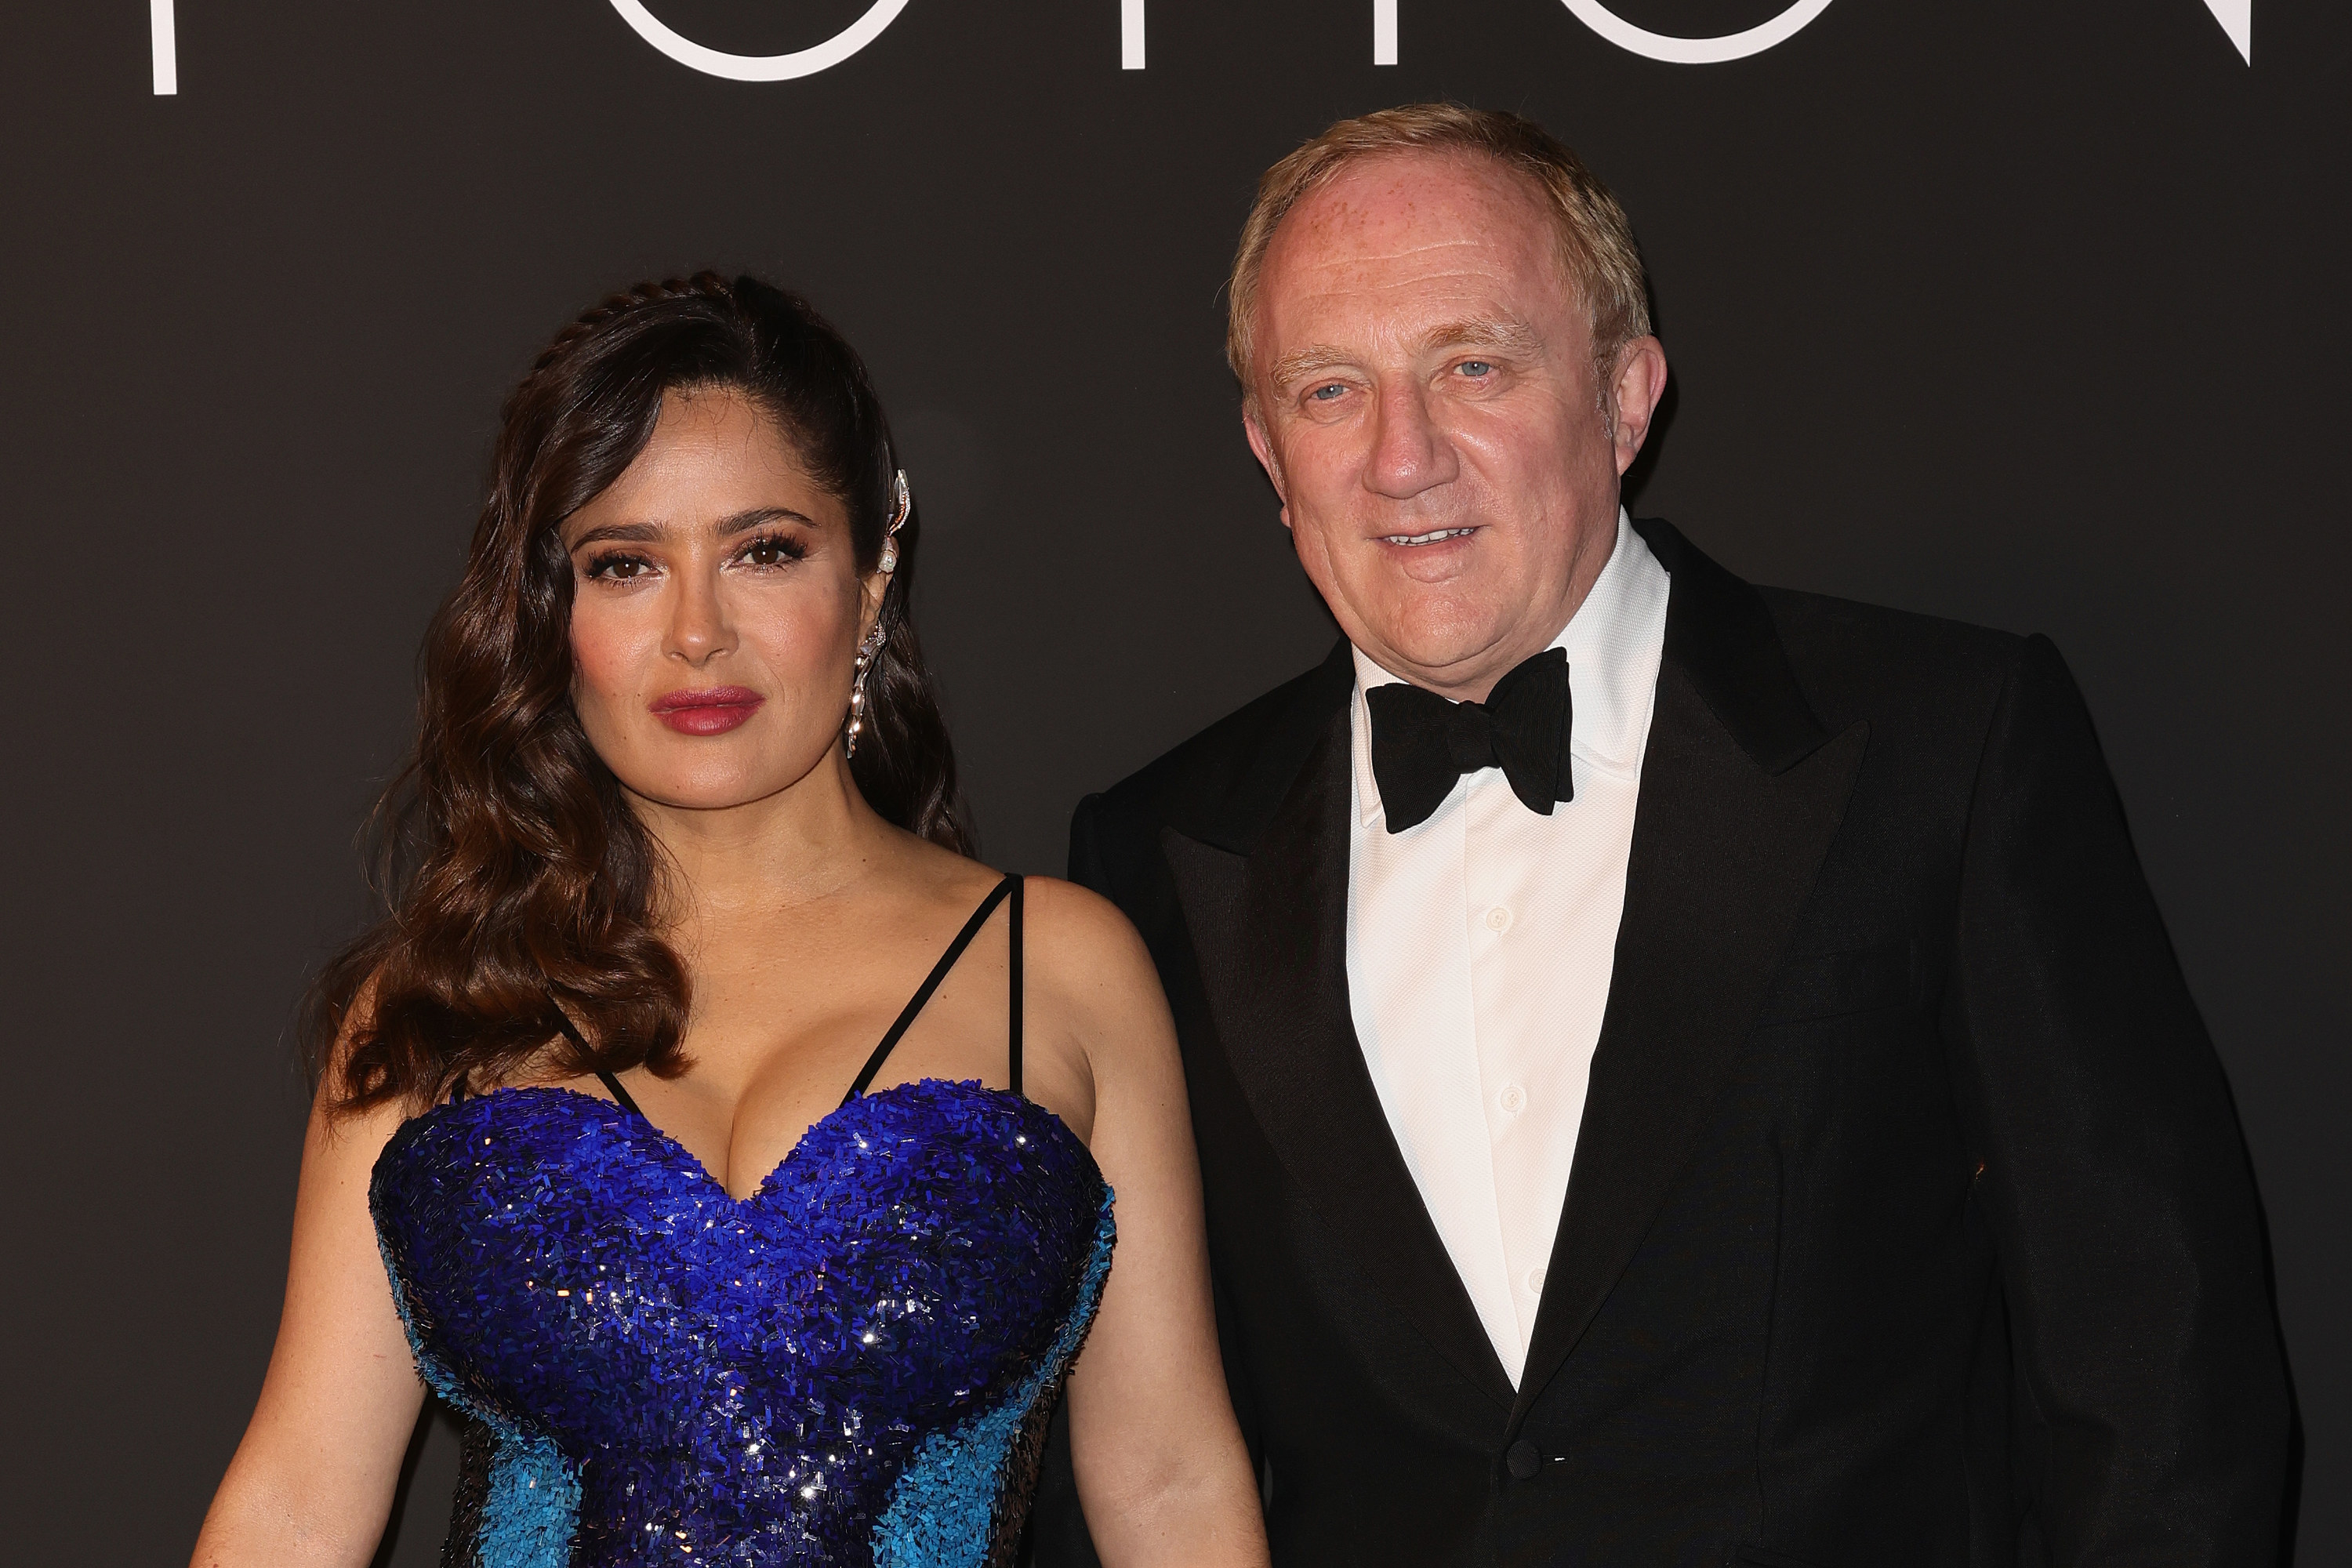 Salma Hayek and Francois-Henri Pinault pose at the Kering Women In Motion Awards for the Cannes Film Festival in July 2021